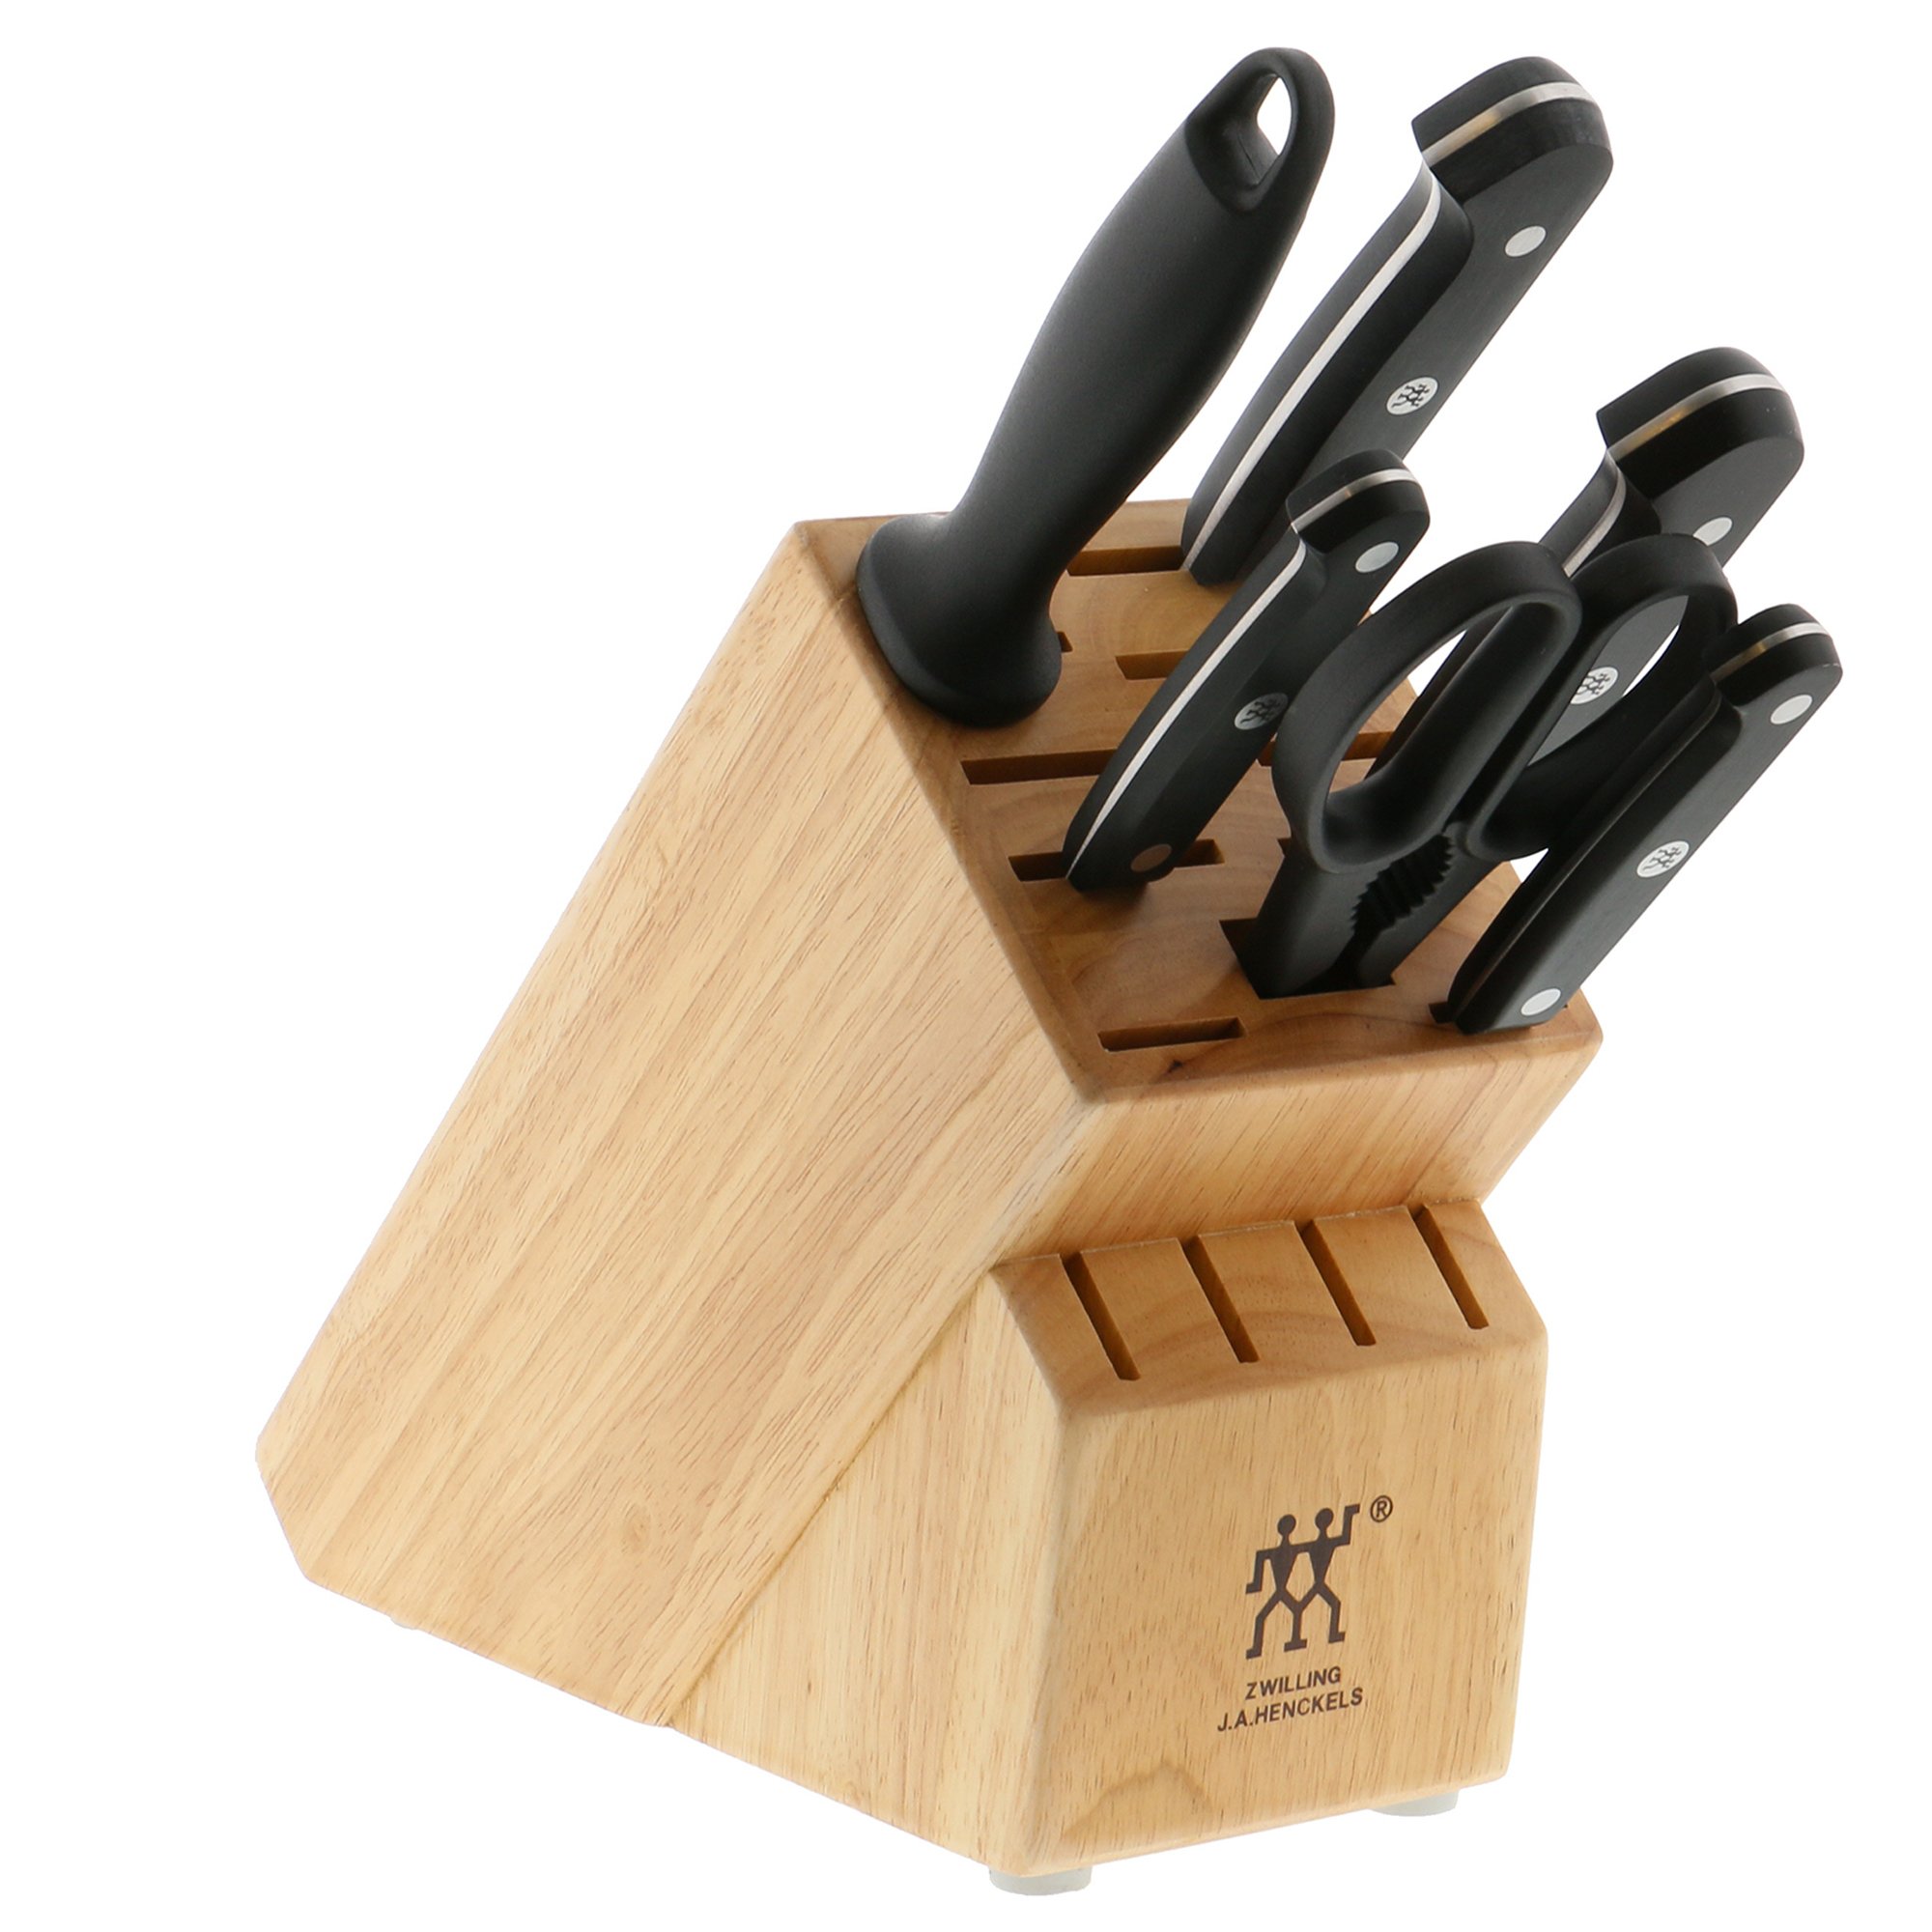 ZWILLING J.A. Henckels Zwilling gourmet 7-pc knife block set, 3.15 Pound